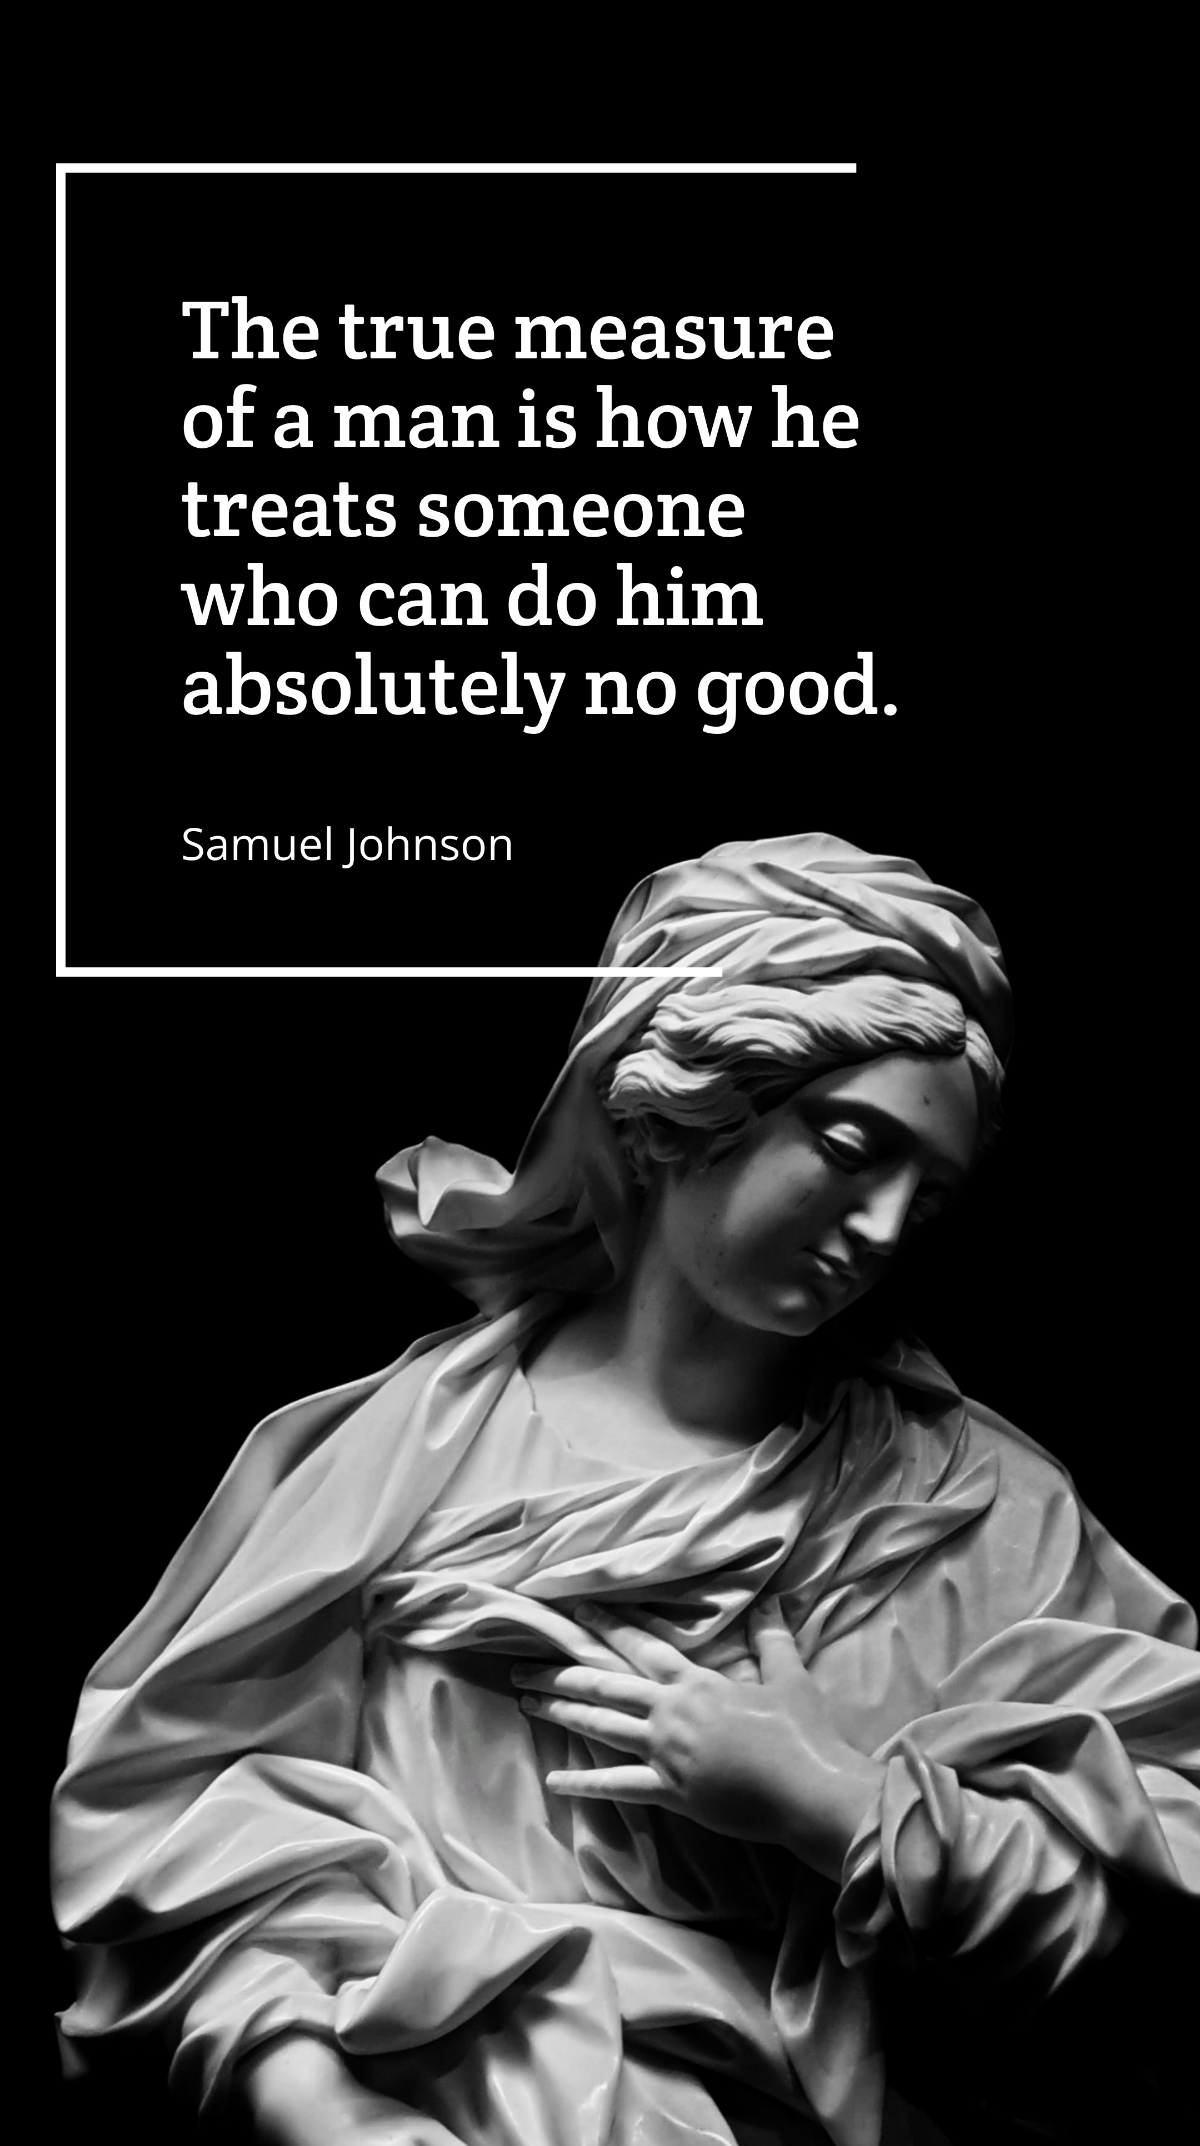 Samuel Johnson - The true measure of a man is how he treats someone who can do him absolutely no good. Template